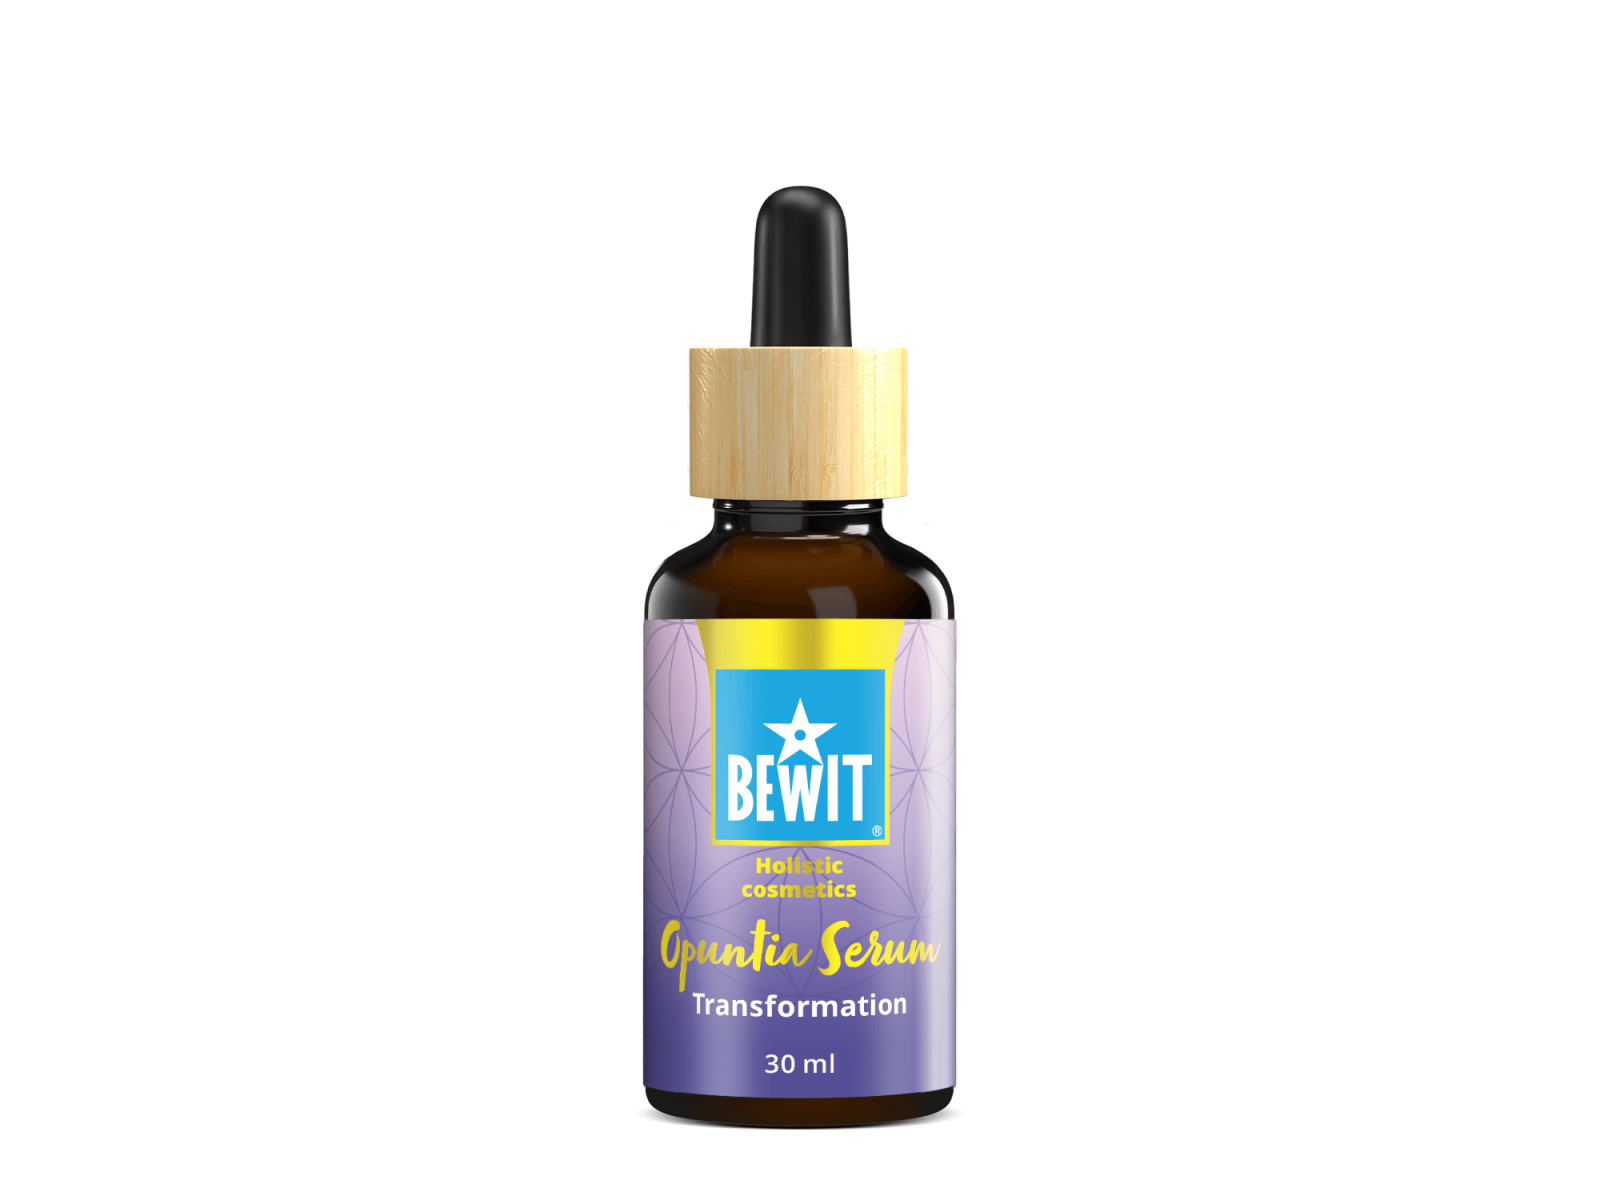 BEWIT Opuntia Serum Transformation - Silk opuntia serum with rare lotus and water lily, bakuchiol and tocopherol - 1